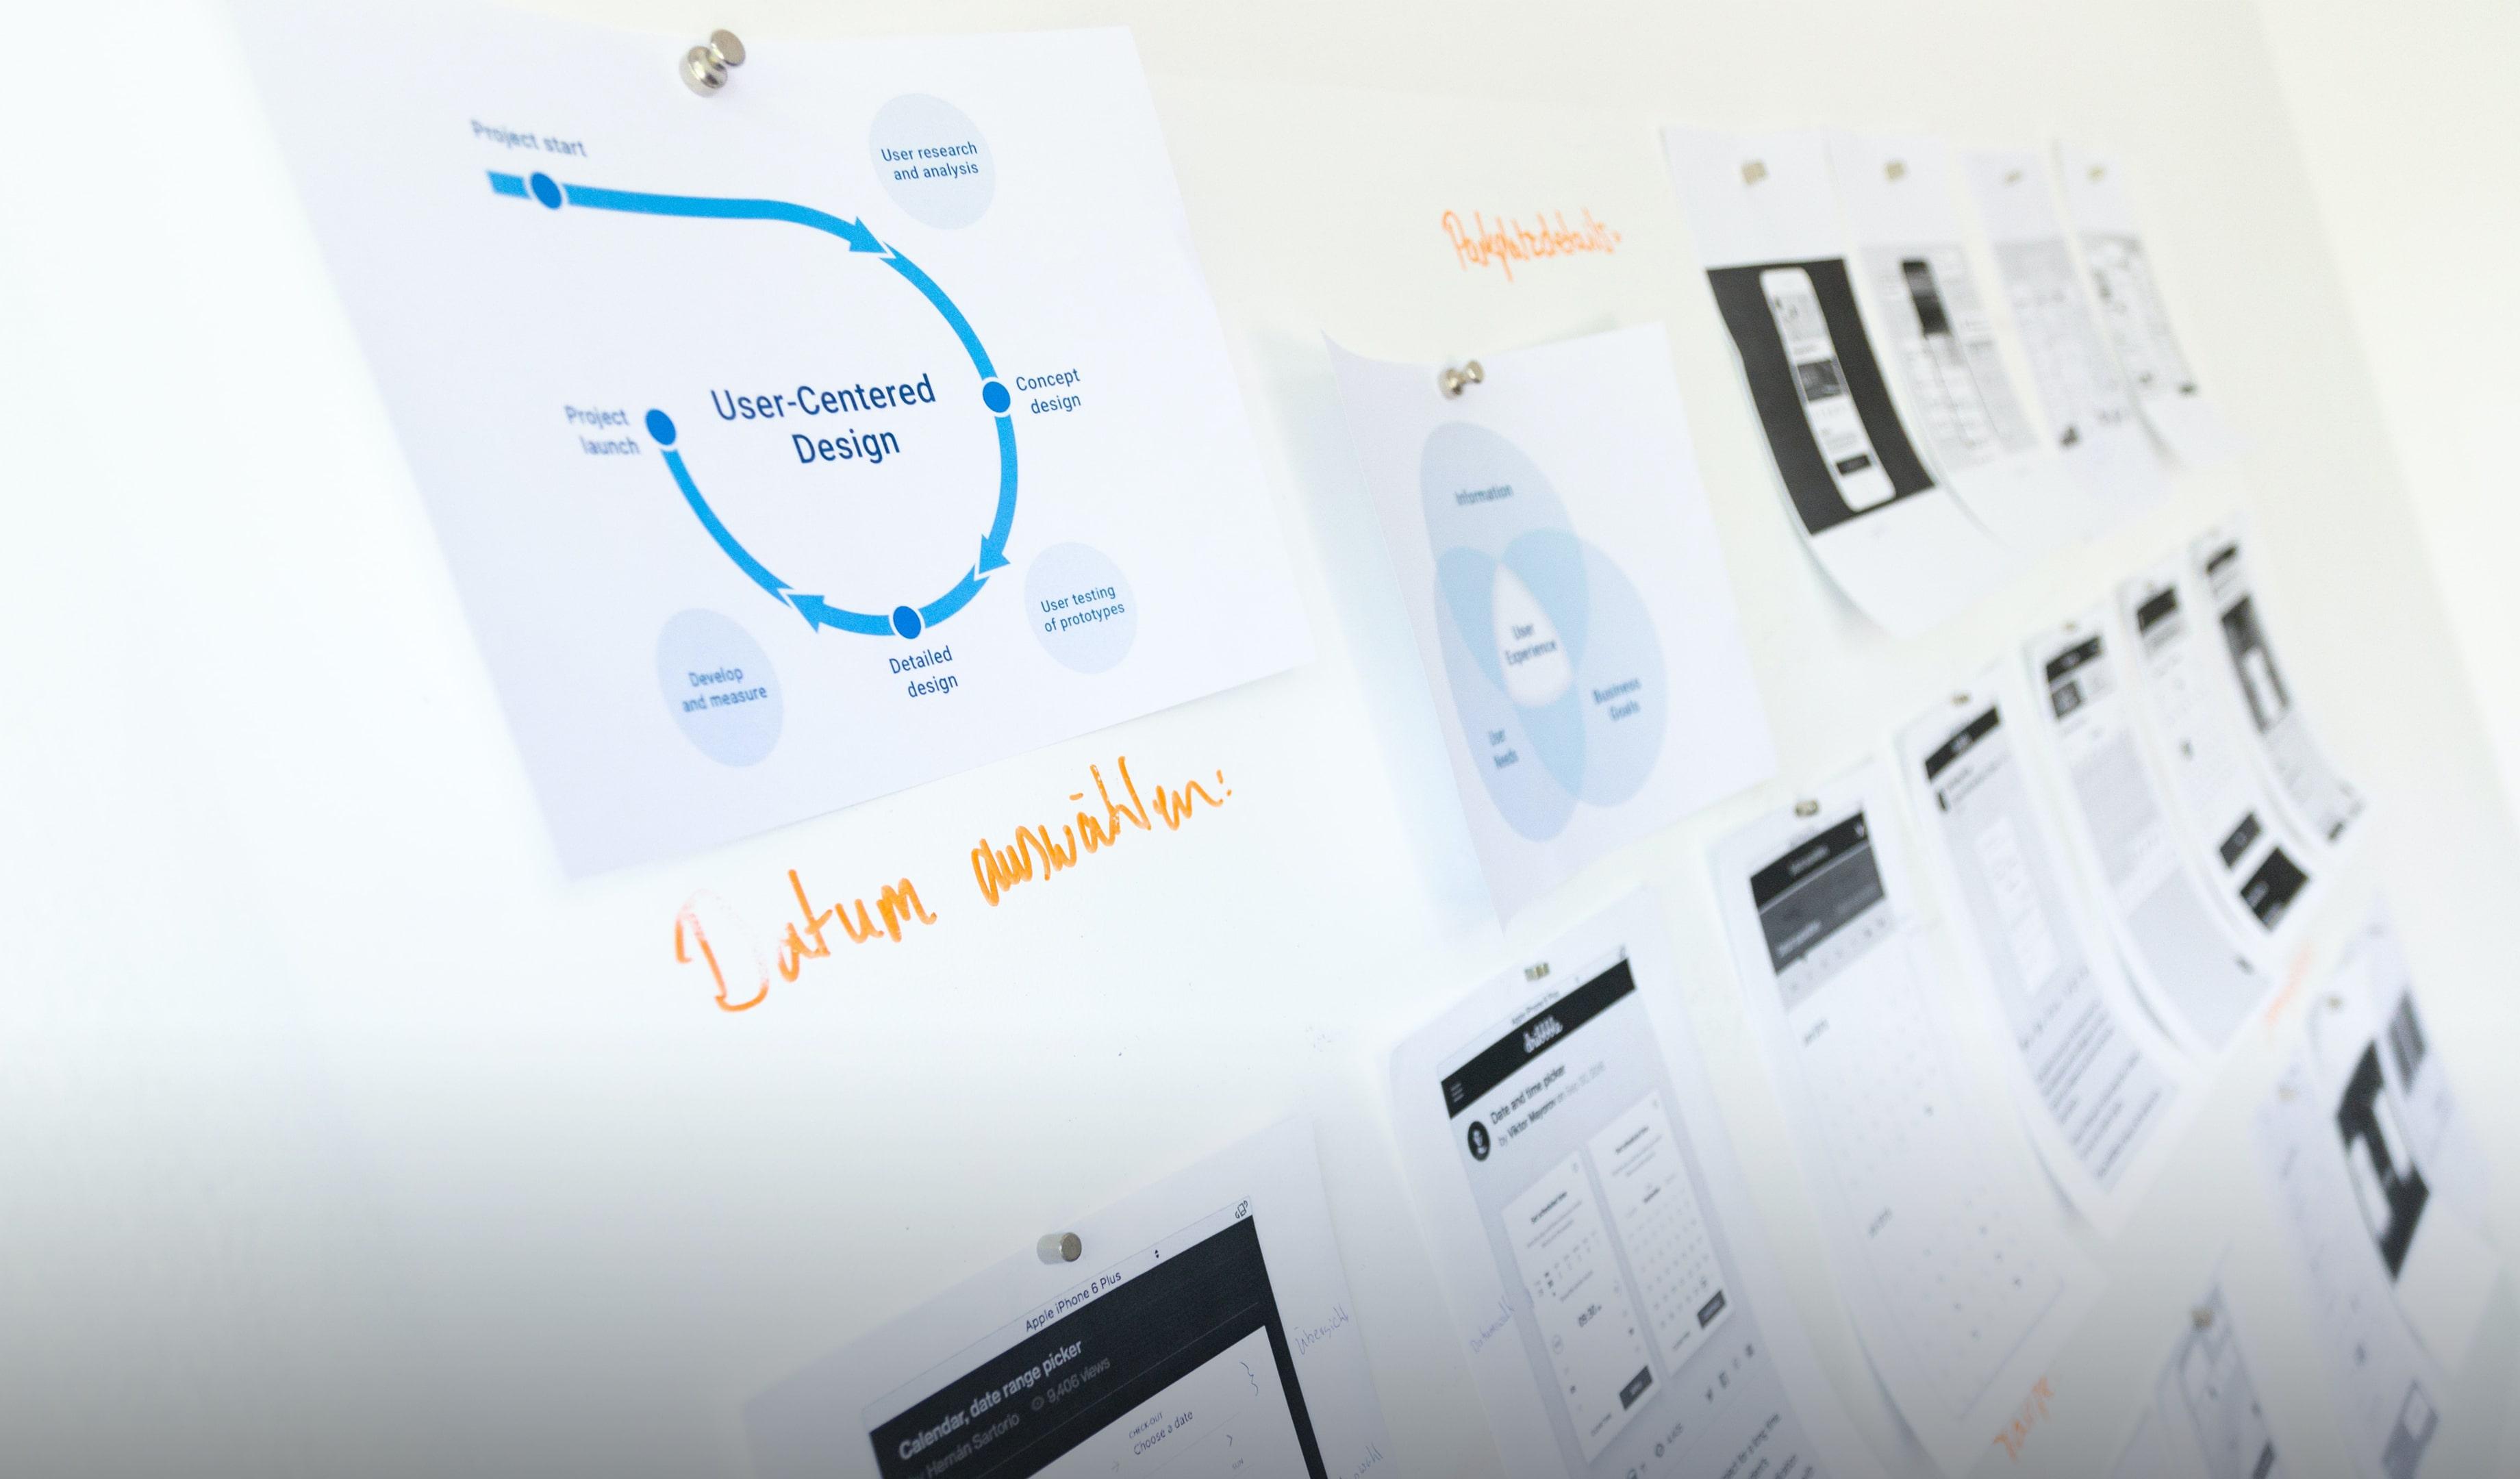 A whiteboard filled with diagrams illustrating UX research service and board information.